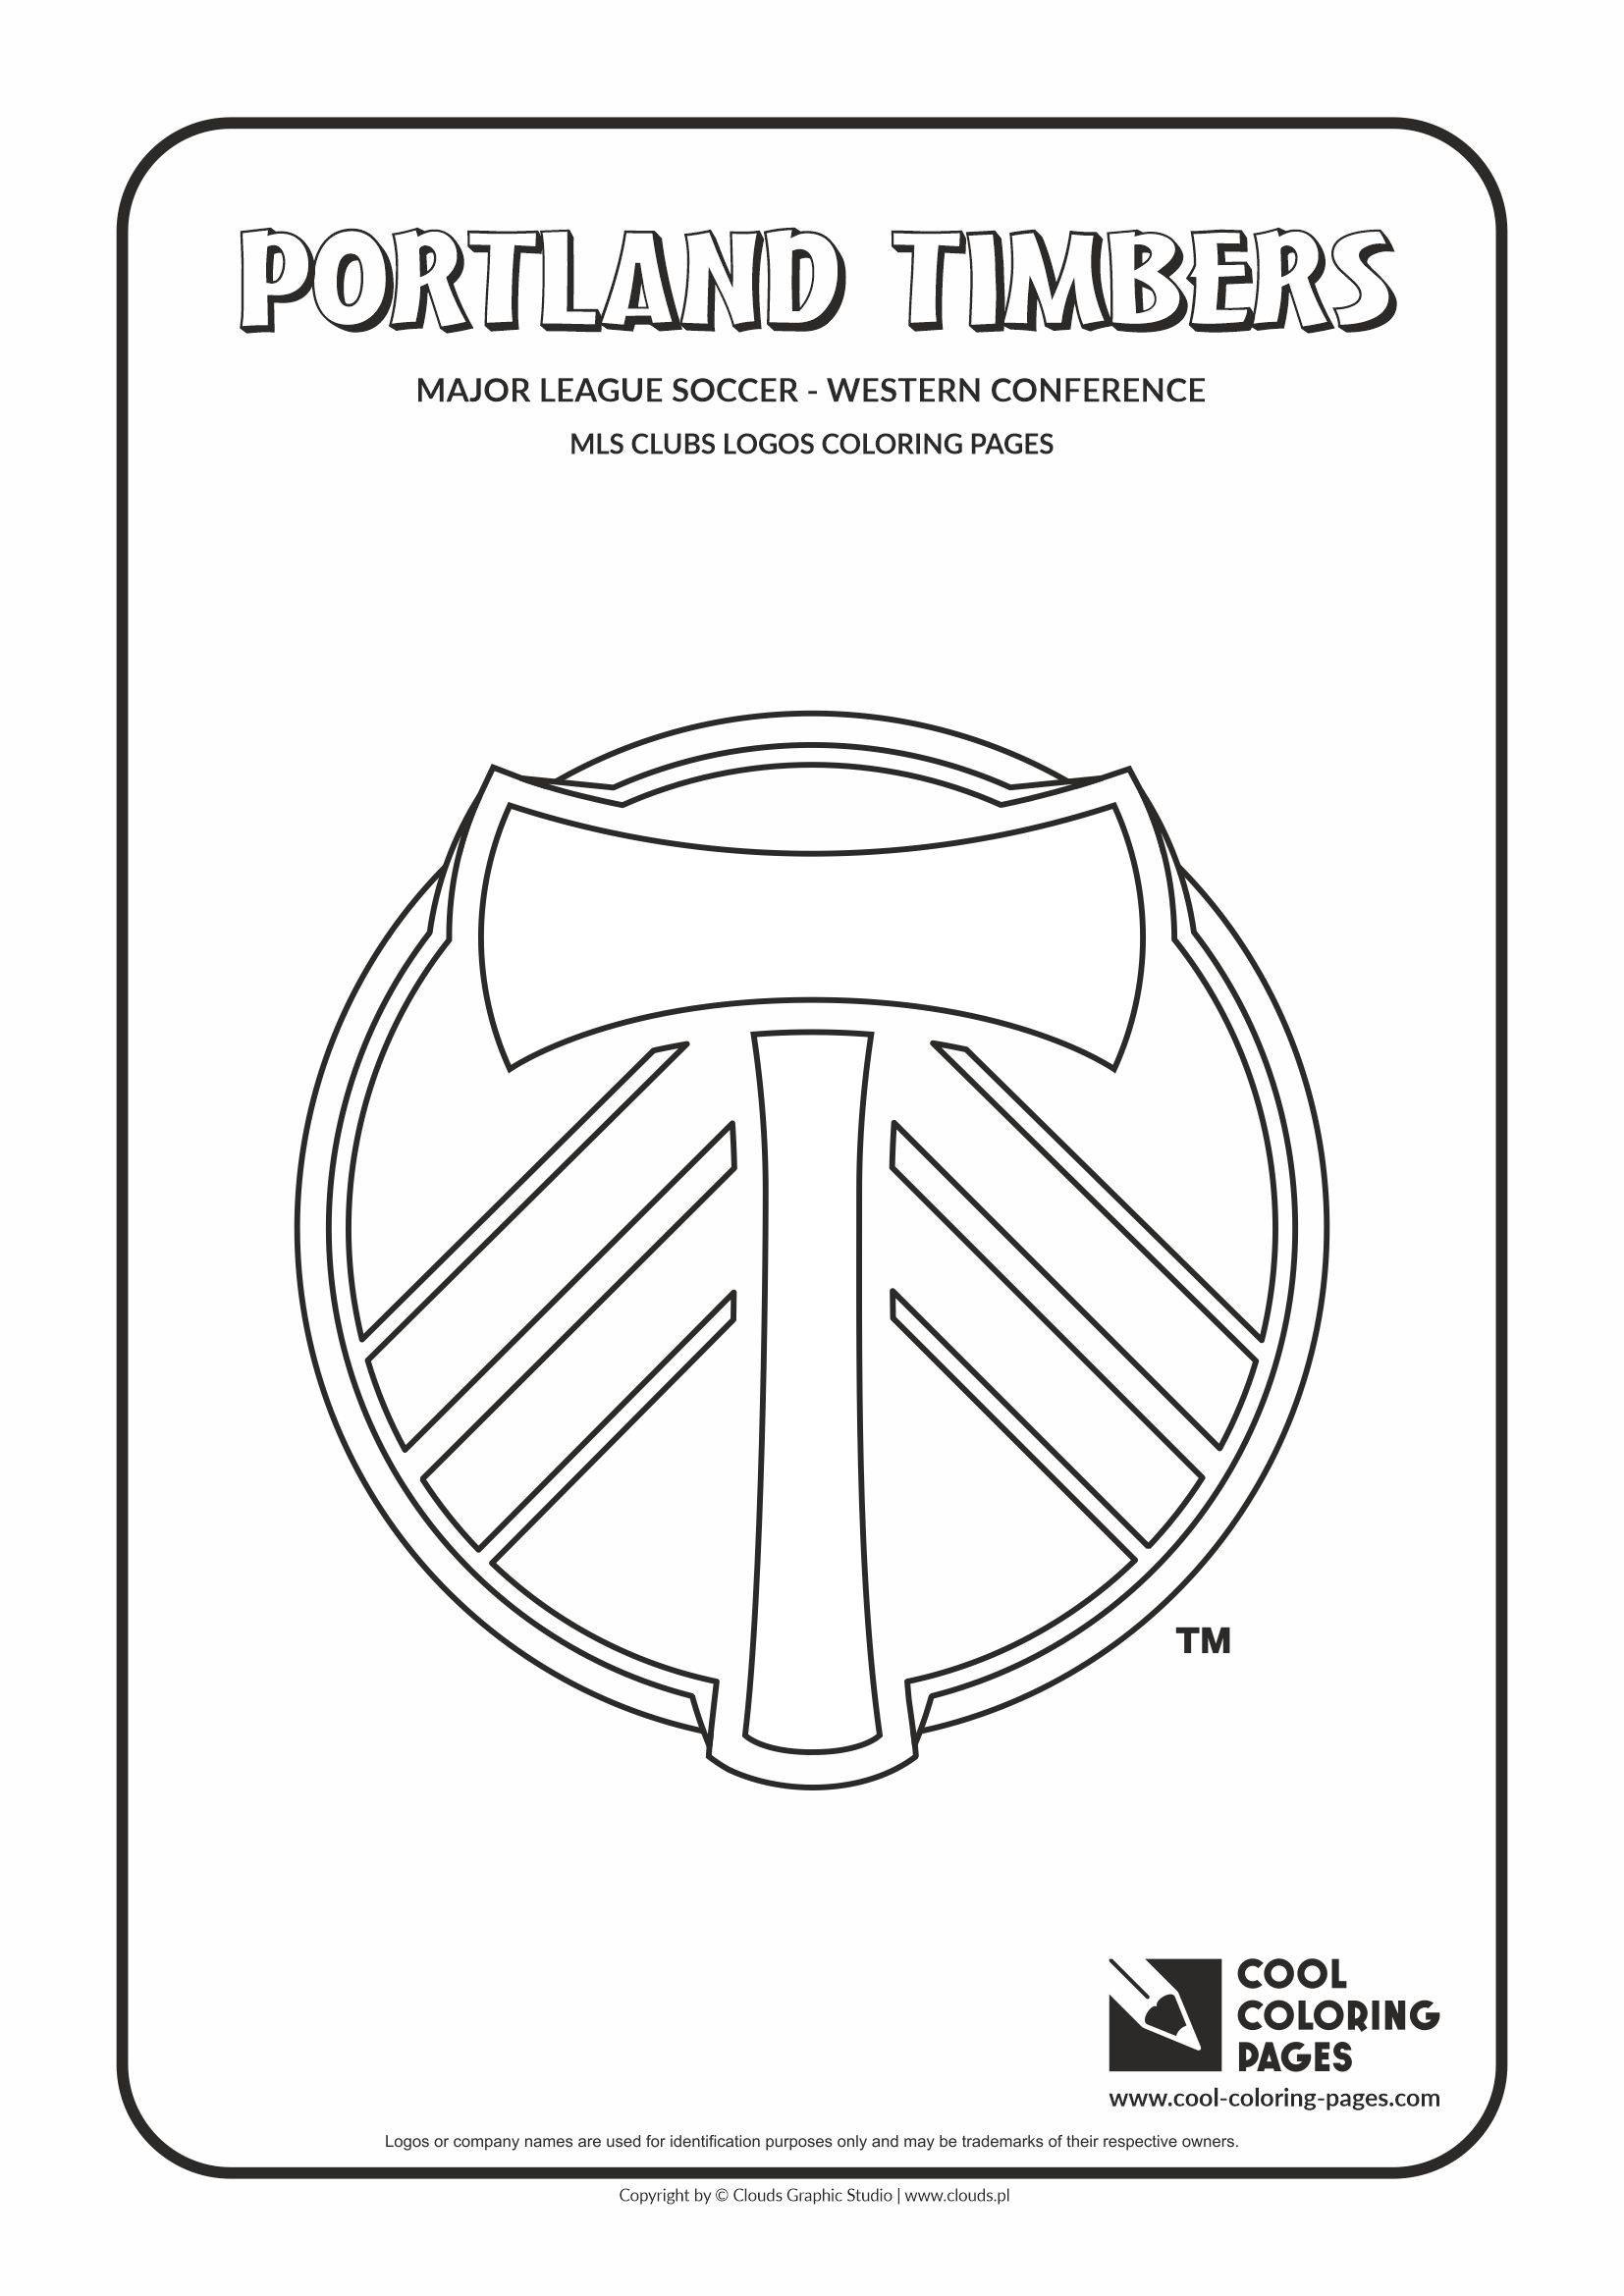 Cool Coloring Pages – MLS Clubs logos – Portland Timbers